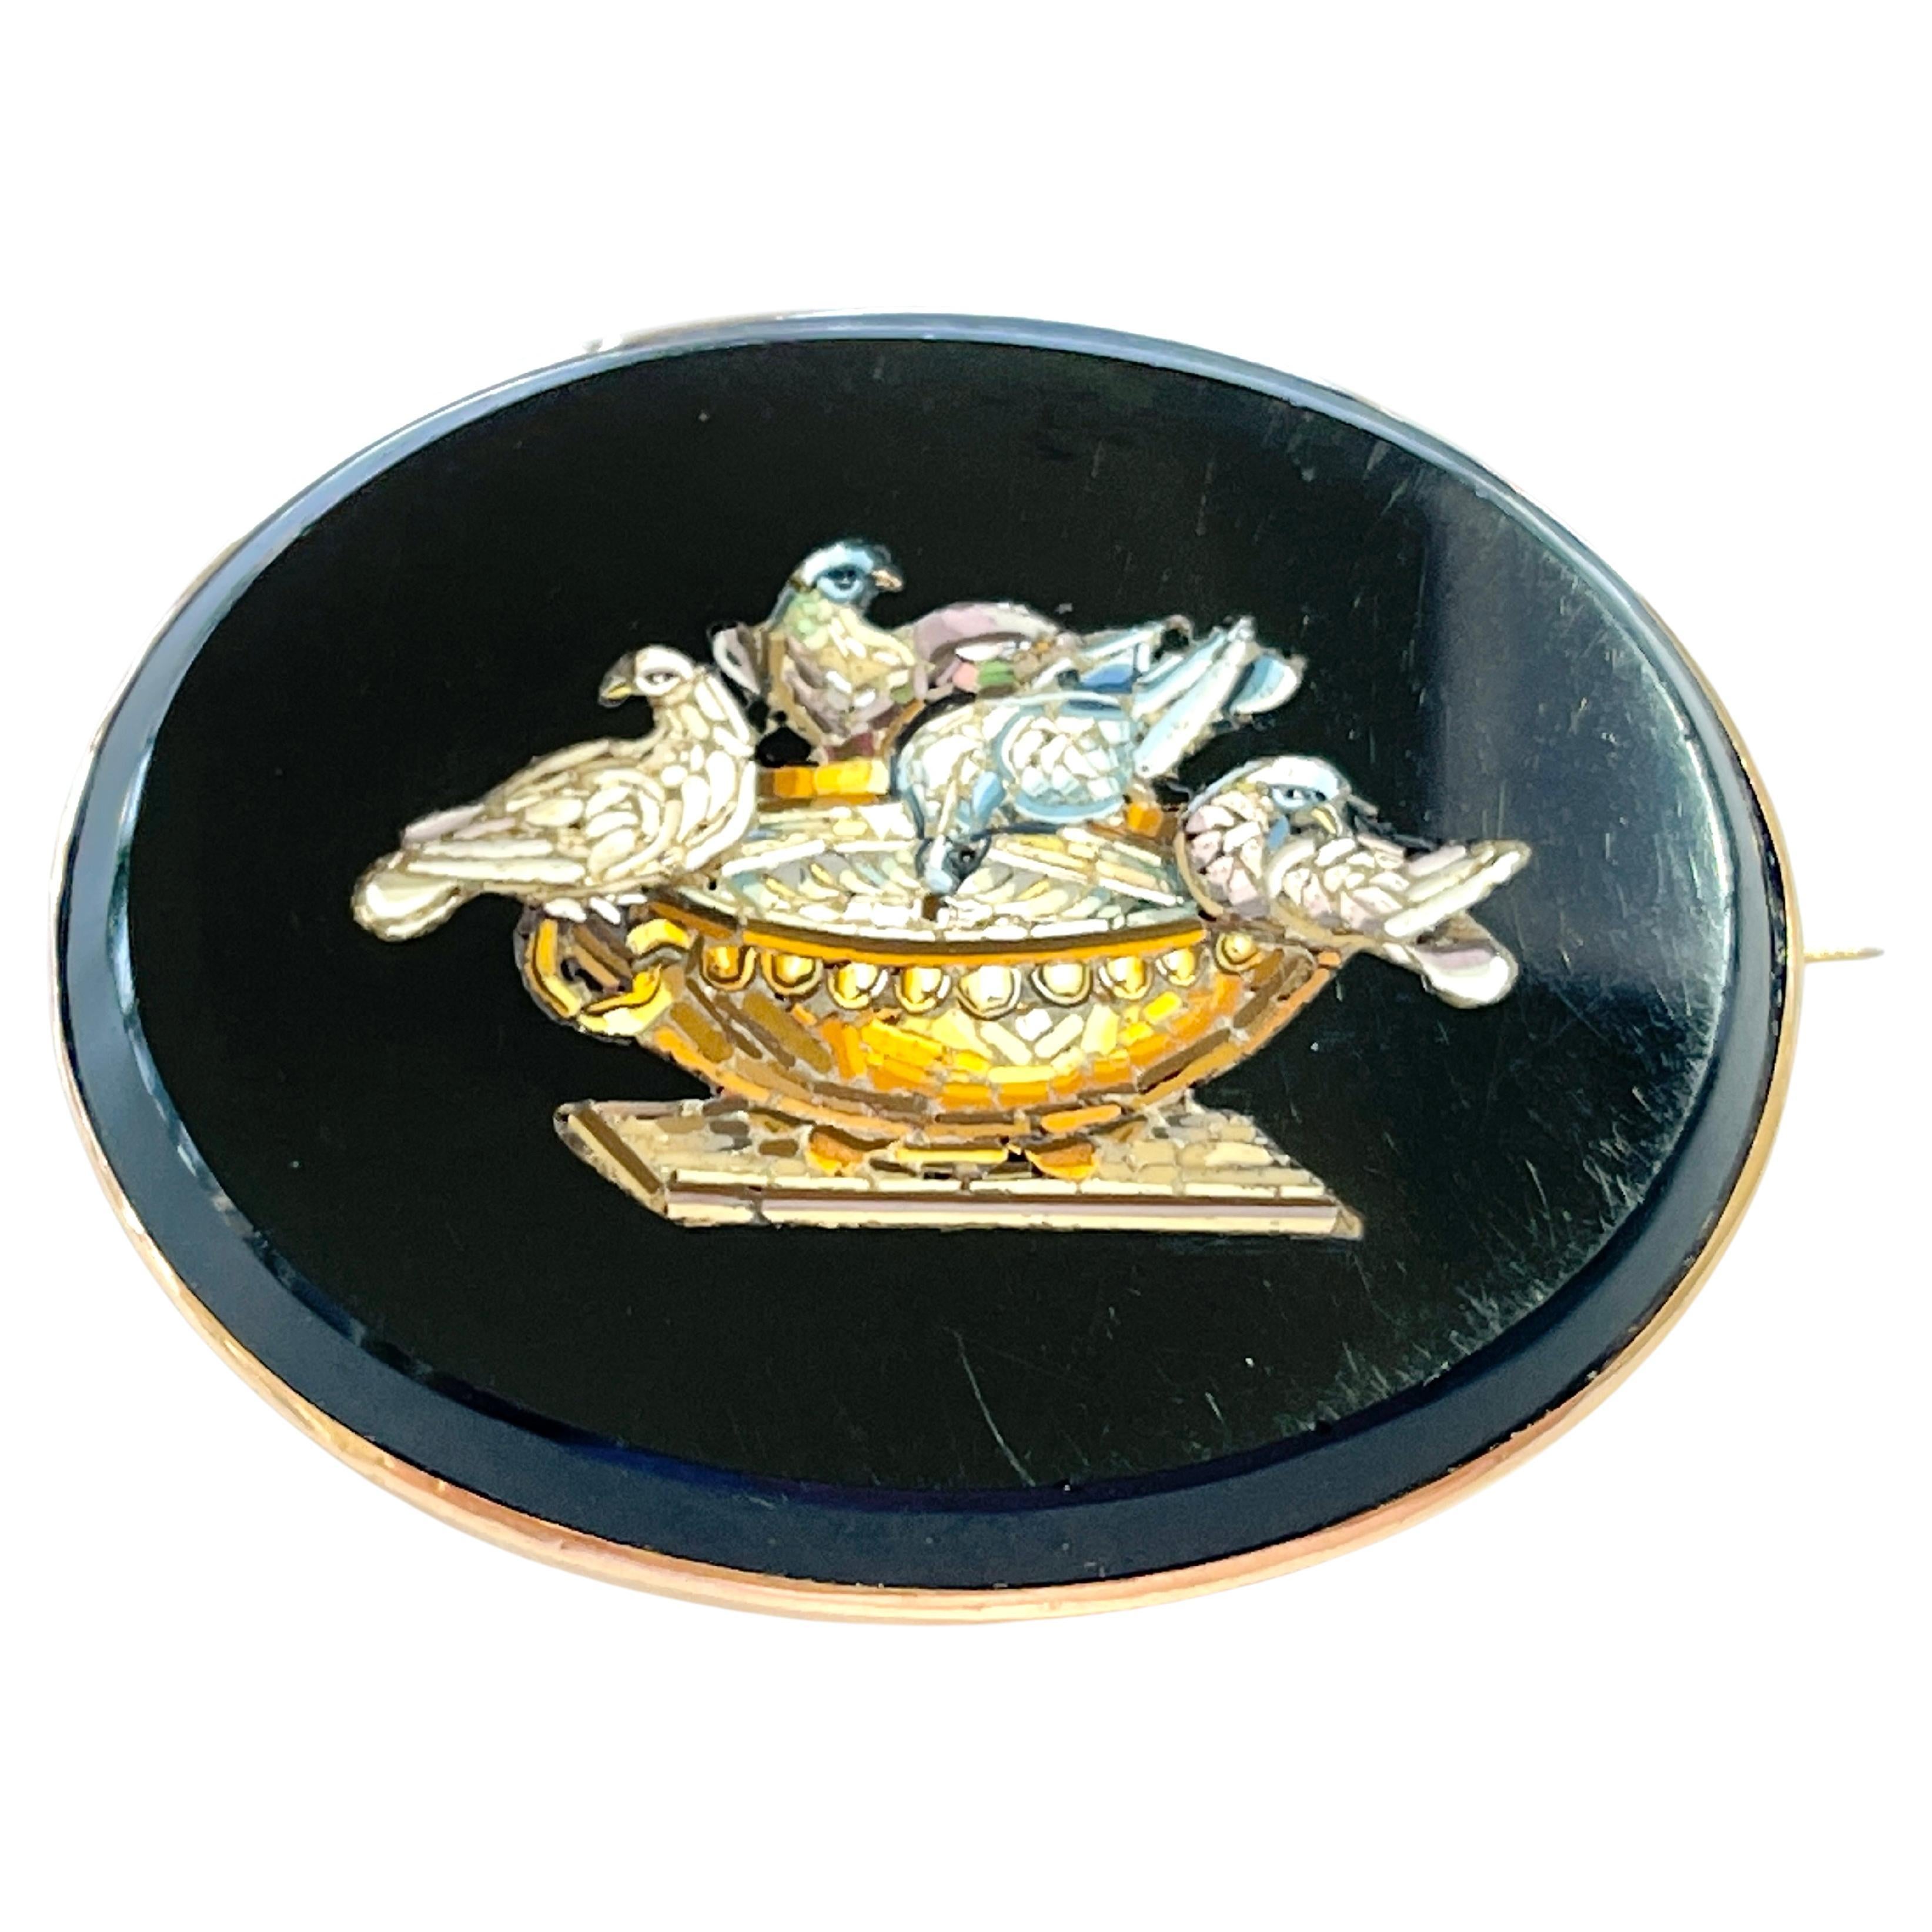 This stunning brooch embodies the Victorian Era of the 'Grand Tour' c1880s.
It features the ‘Doves of Pliny’ created by micro pieces of coloured glass inlayed into black glass.  The setting tests 15ct Rose Gold but is not stamped.  The piece is